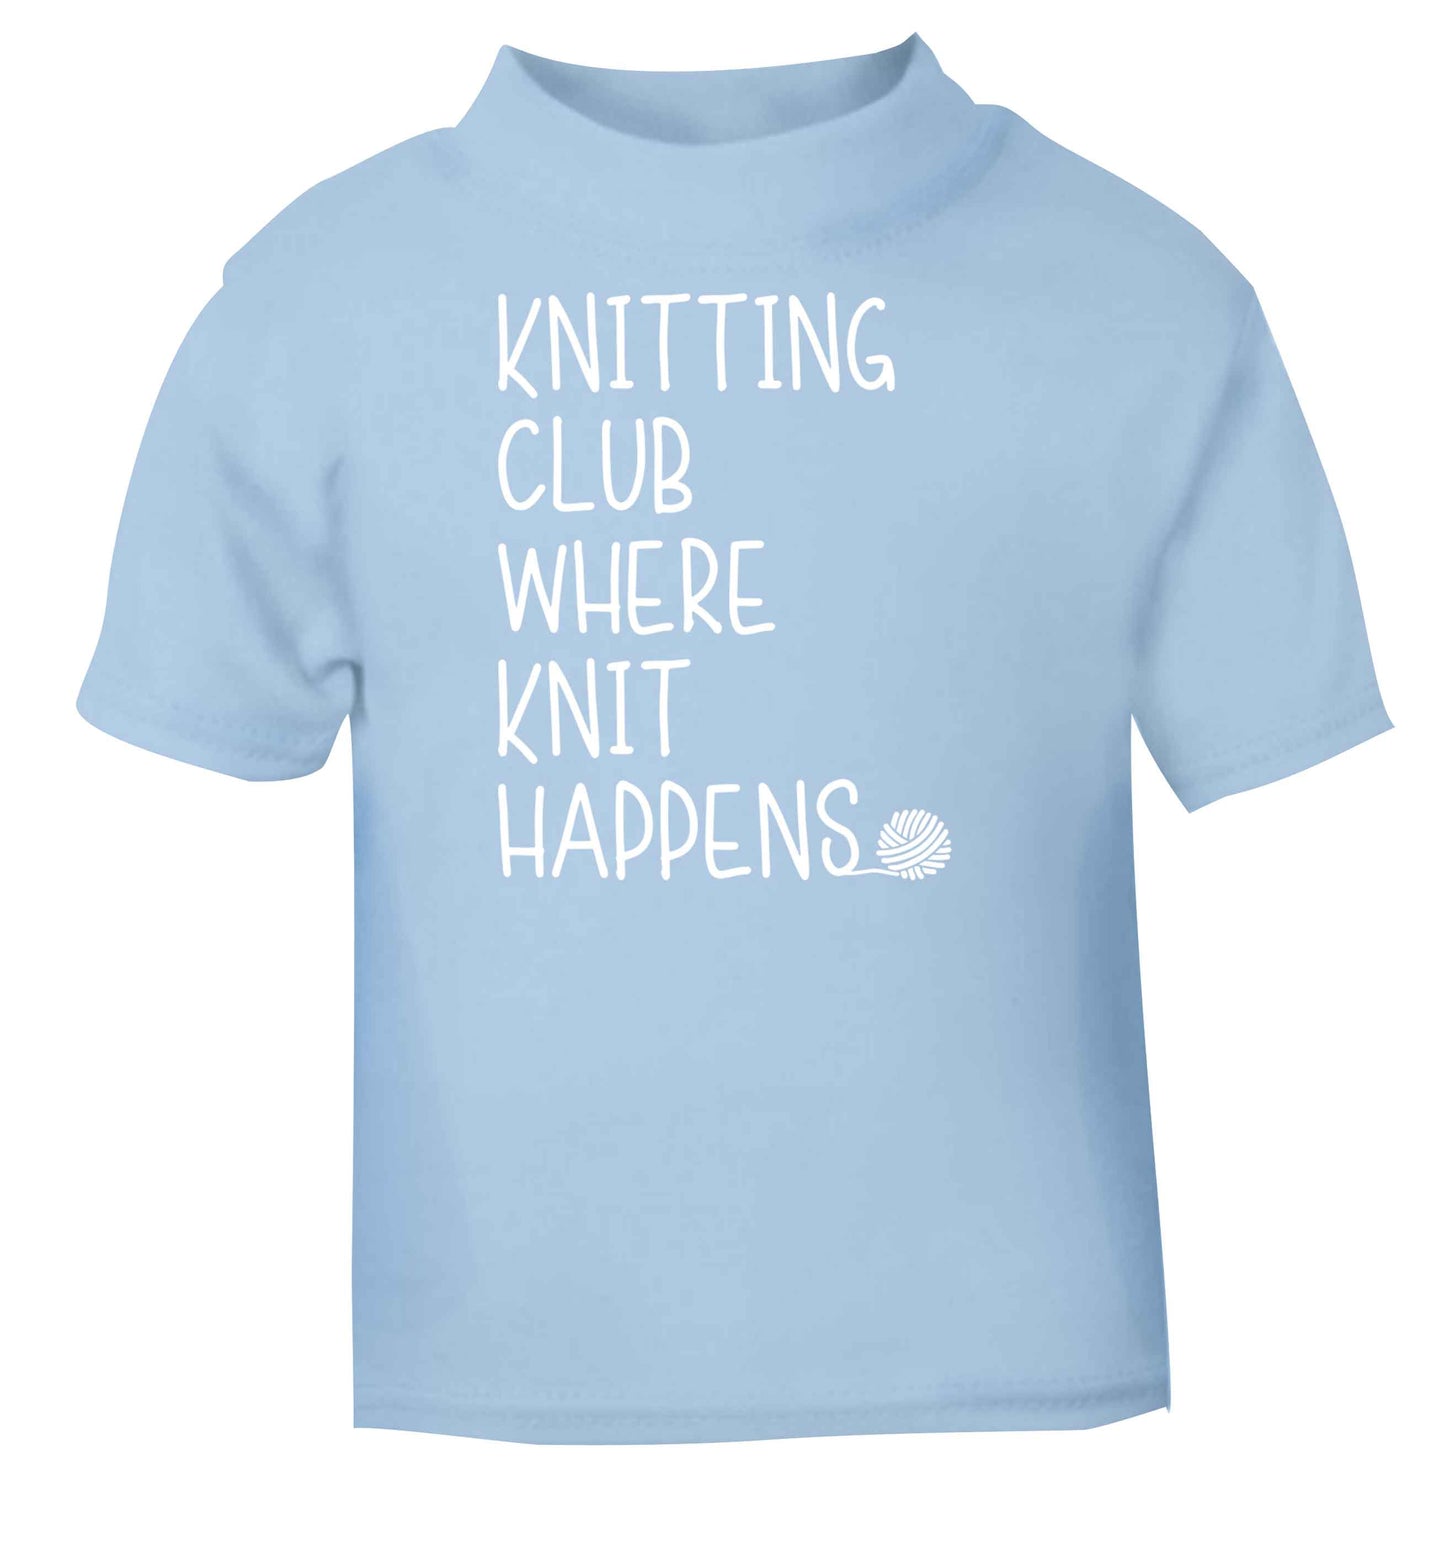 Knitting club where knit happens light blue baby toddler Tshirt 2 Years